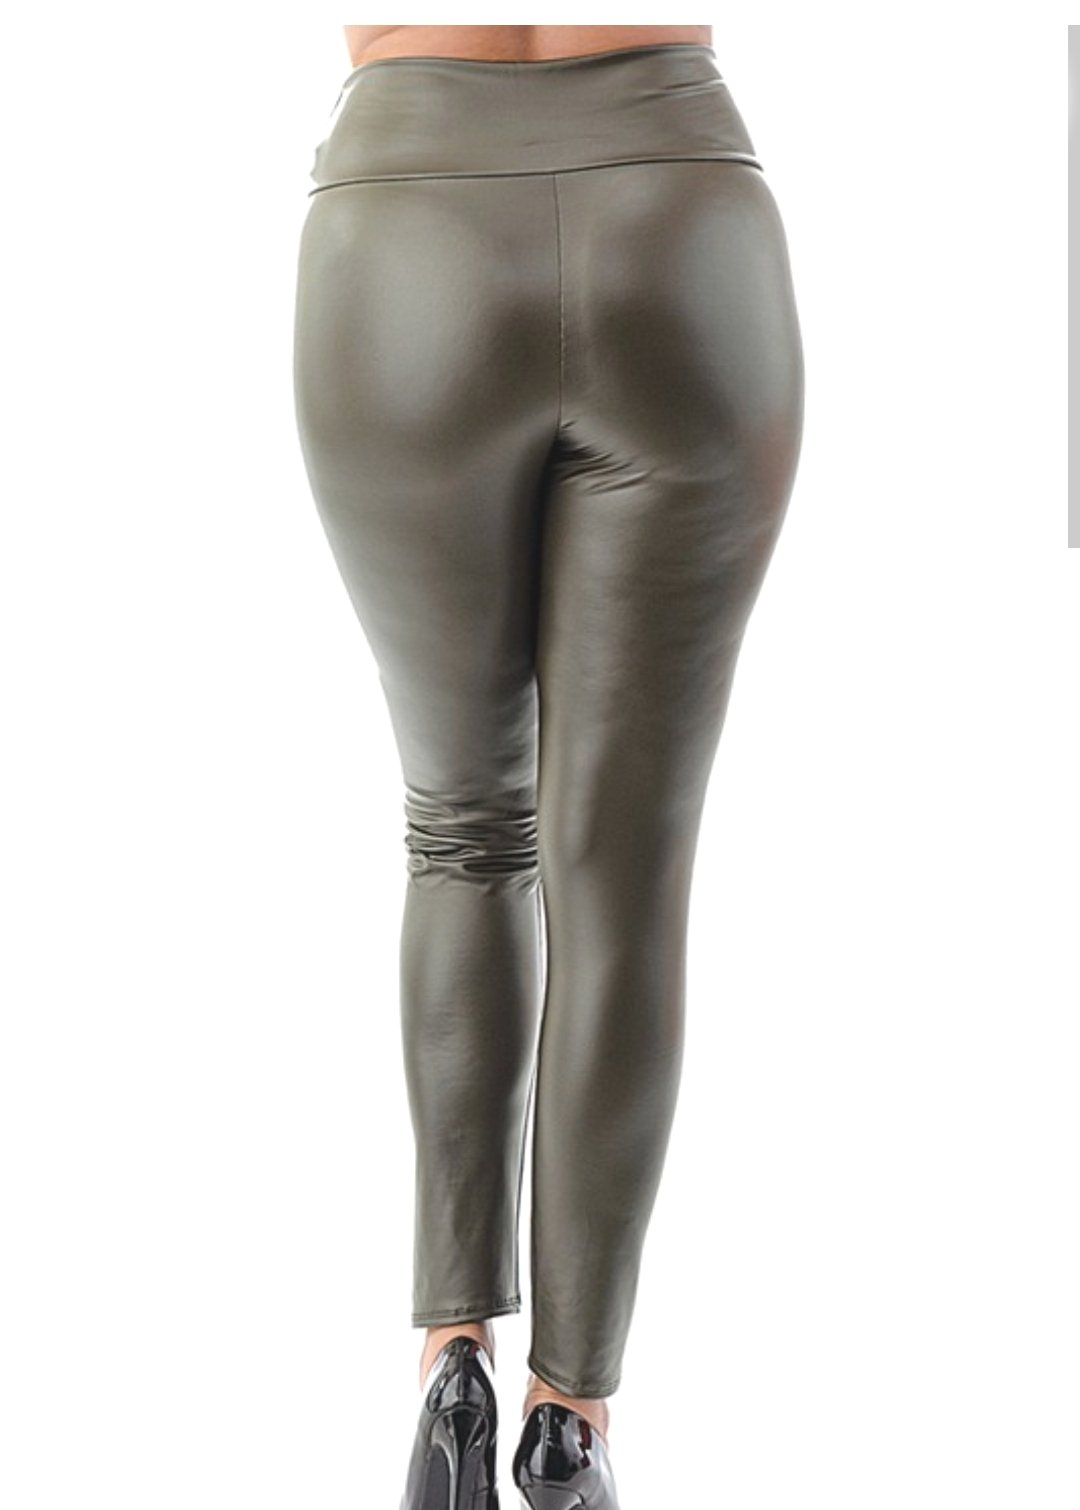 Online In Shop – Turn Heads Dark Pants- Olive Leather Plus Size